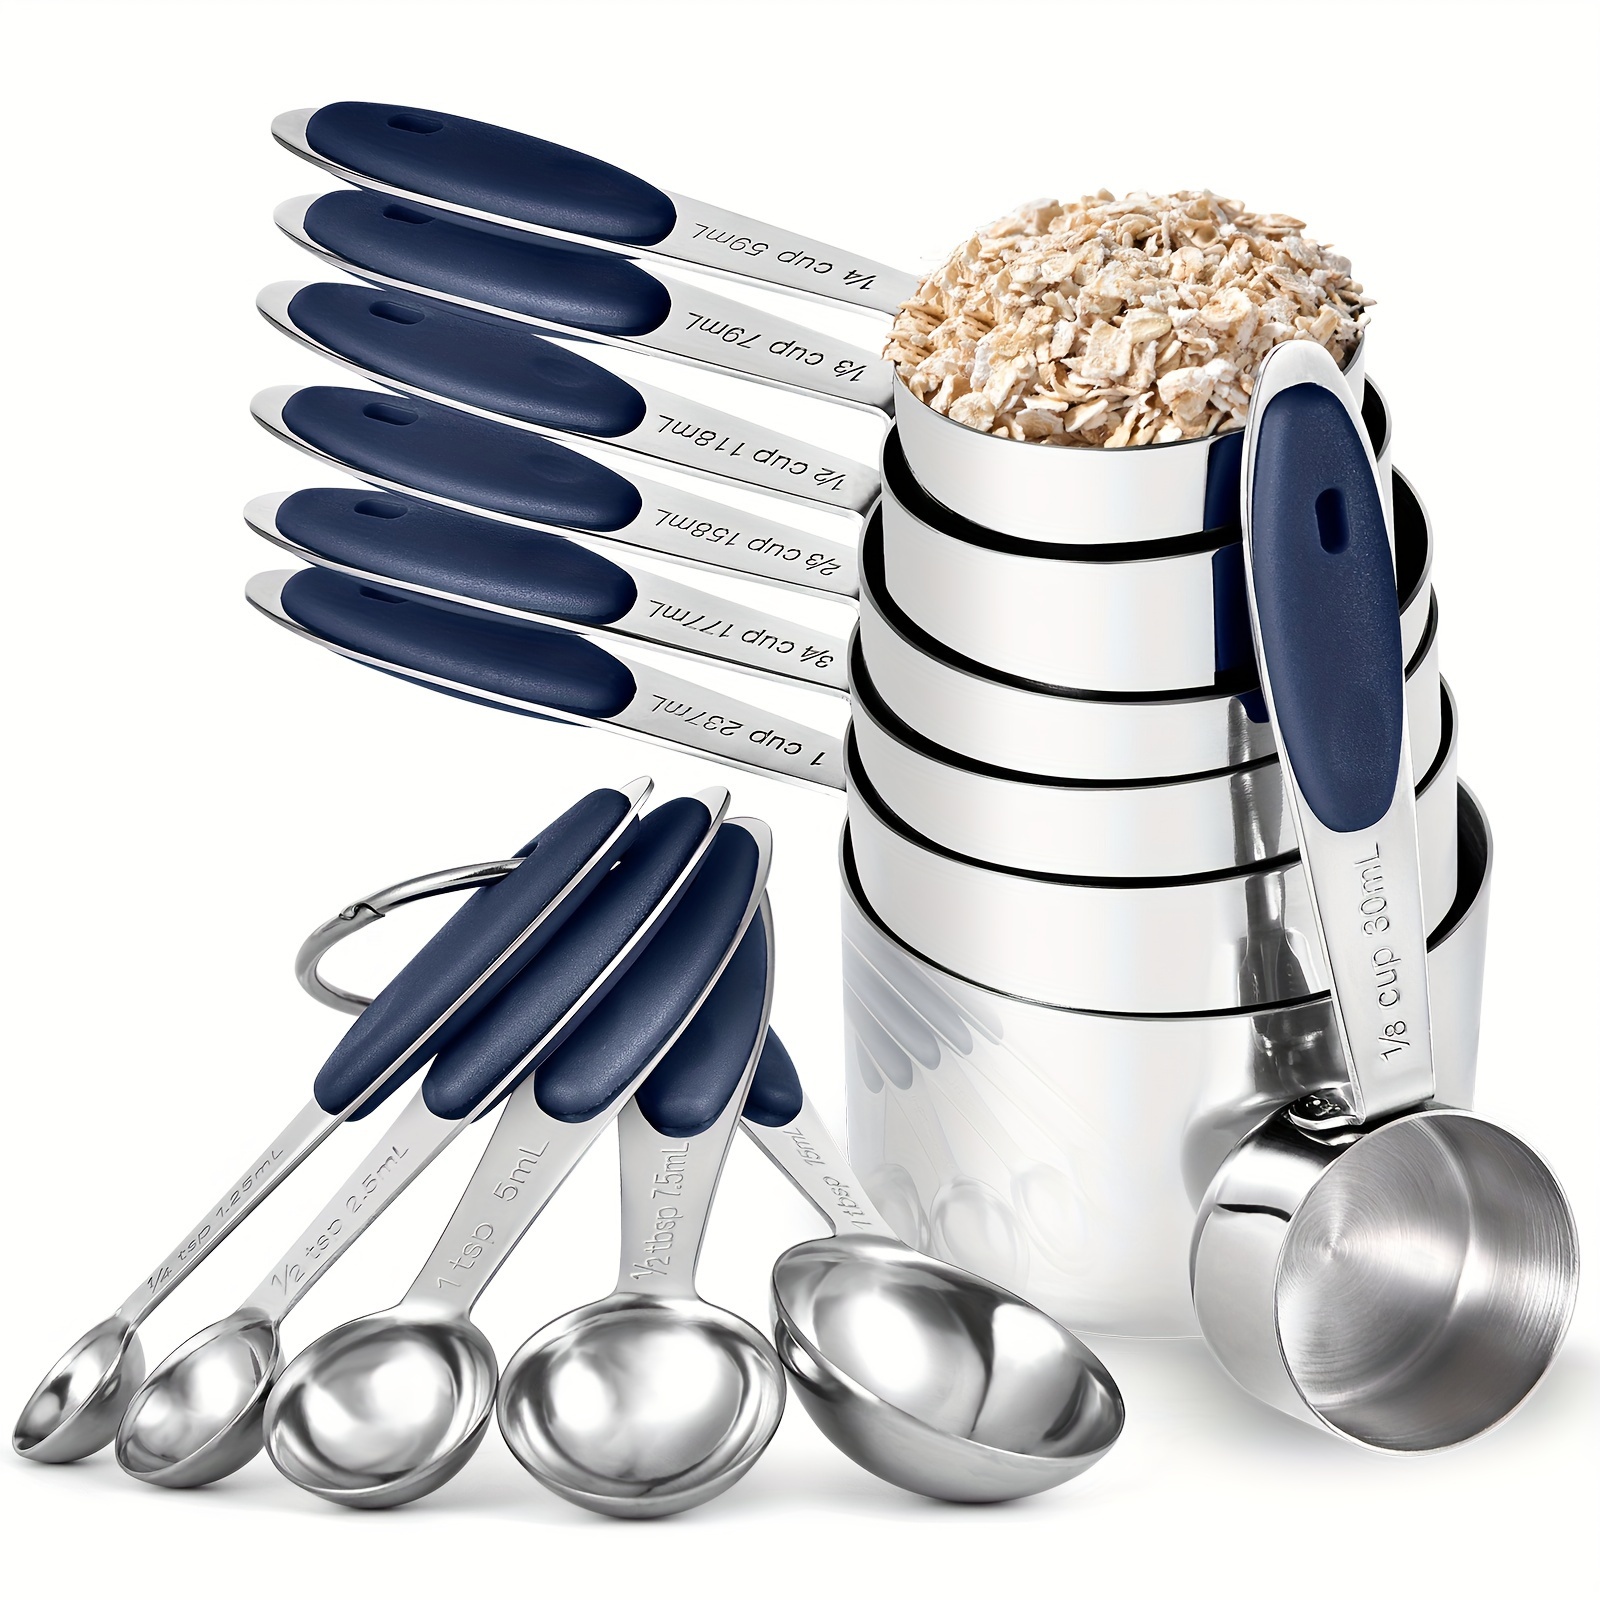 

Measuring Cups And Spoons Set: U-taste 18/8 Stainless Steel 12 Pieces Metal Nesting Stacking Kitchen Baking Cooking Food Measure Set For Dry And Liquid Ingredient